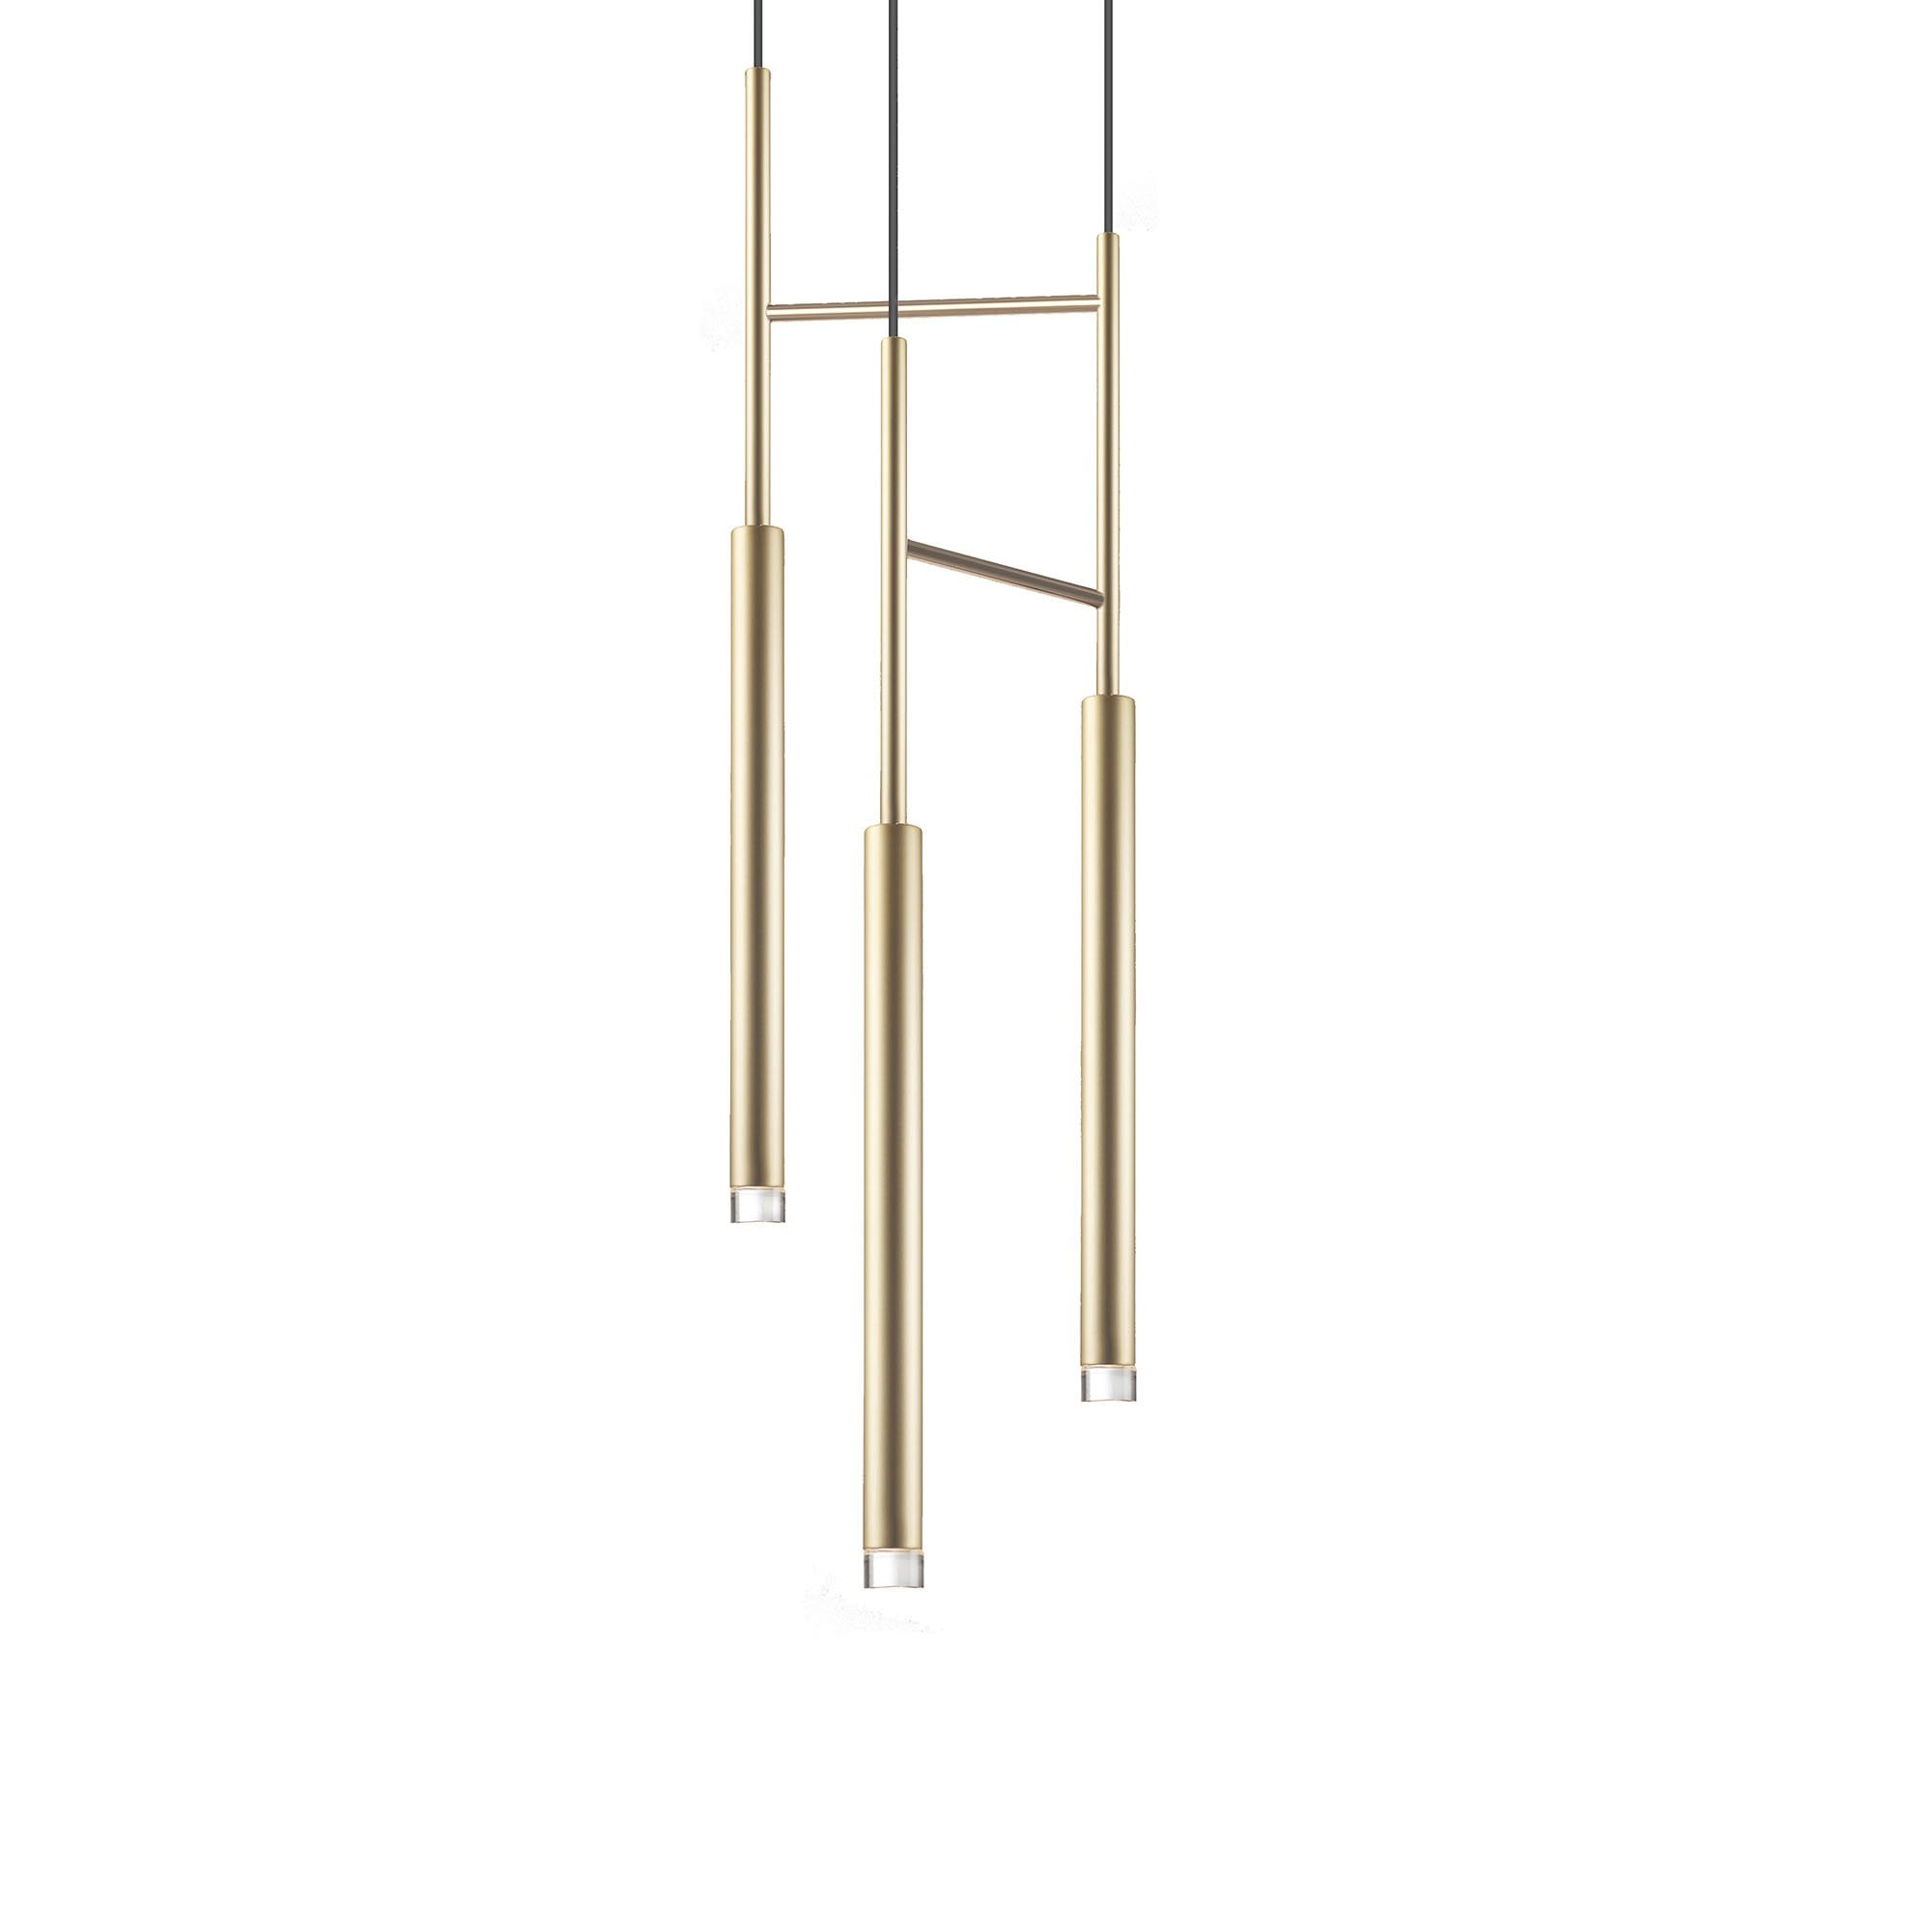 candle-satin-gold-hanging-ceiling-light-00-6021-27-27-p59736-155464_zoom.jpg